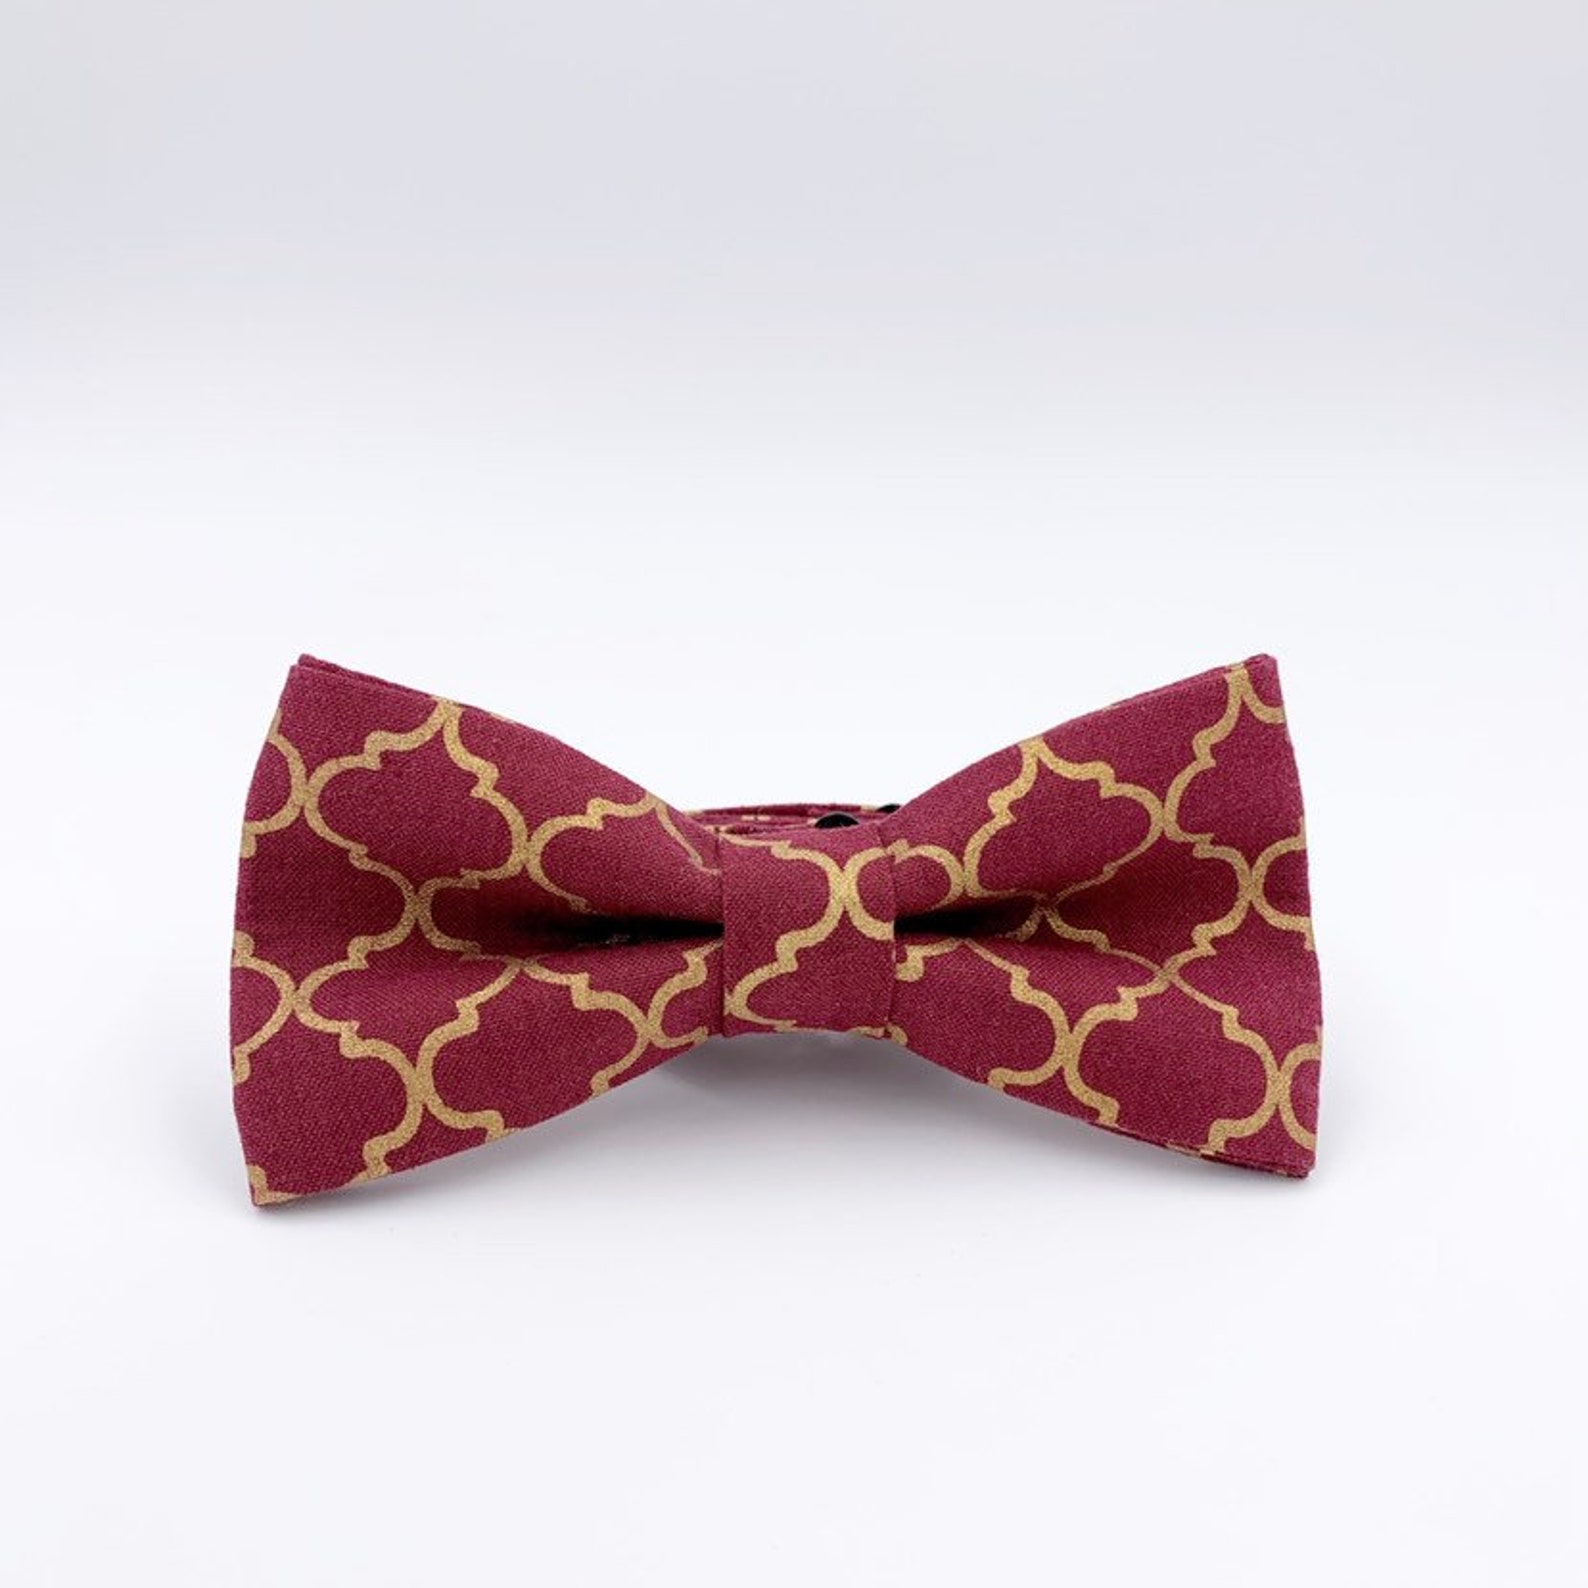 Bow Tie in Maroon and Gold Print Pre-Tied Bow Tie Wedding | Etsy